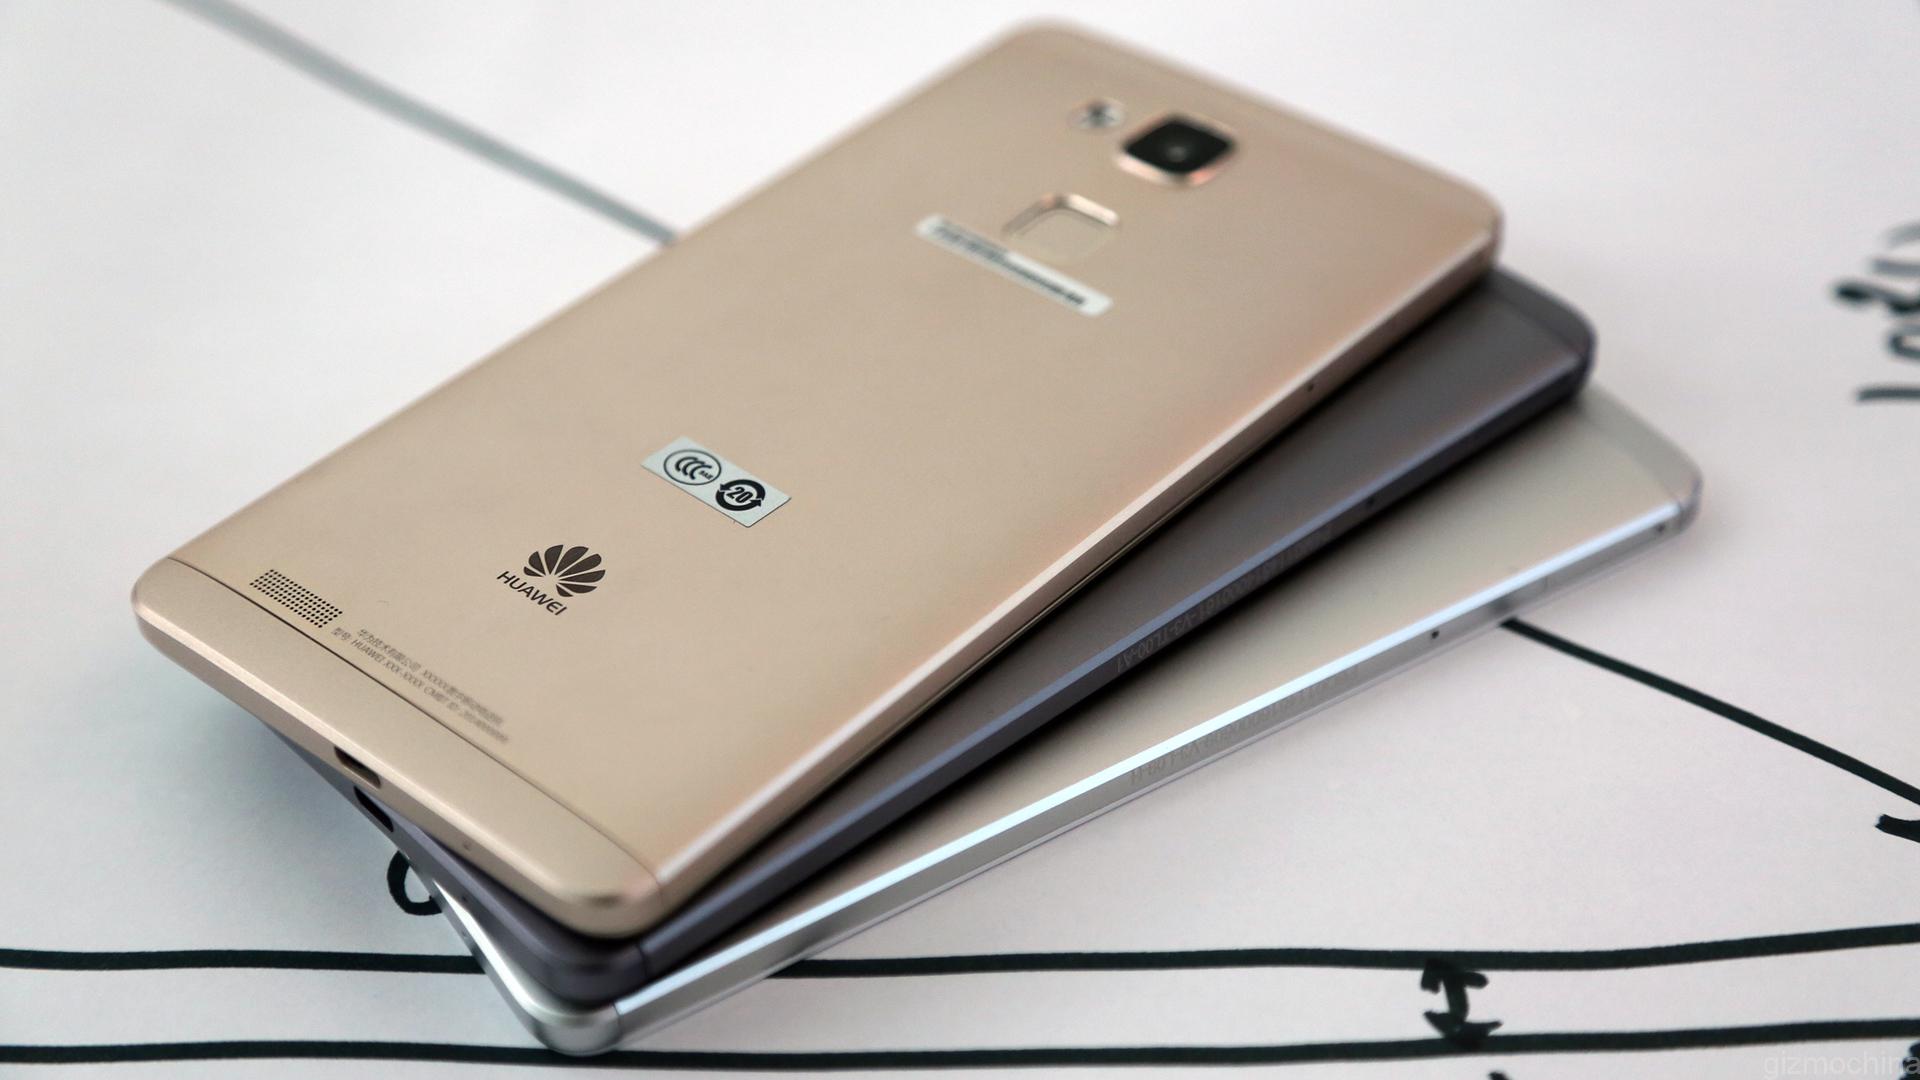 Huawei Announces The Ascend Mate7 With A 6-inch 1080p Screen, Octa-Core ...